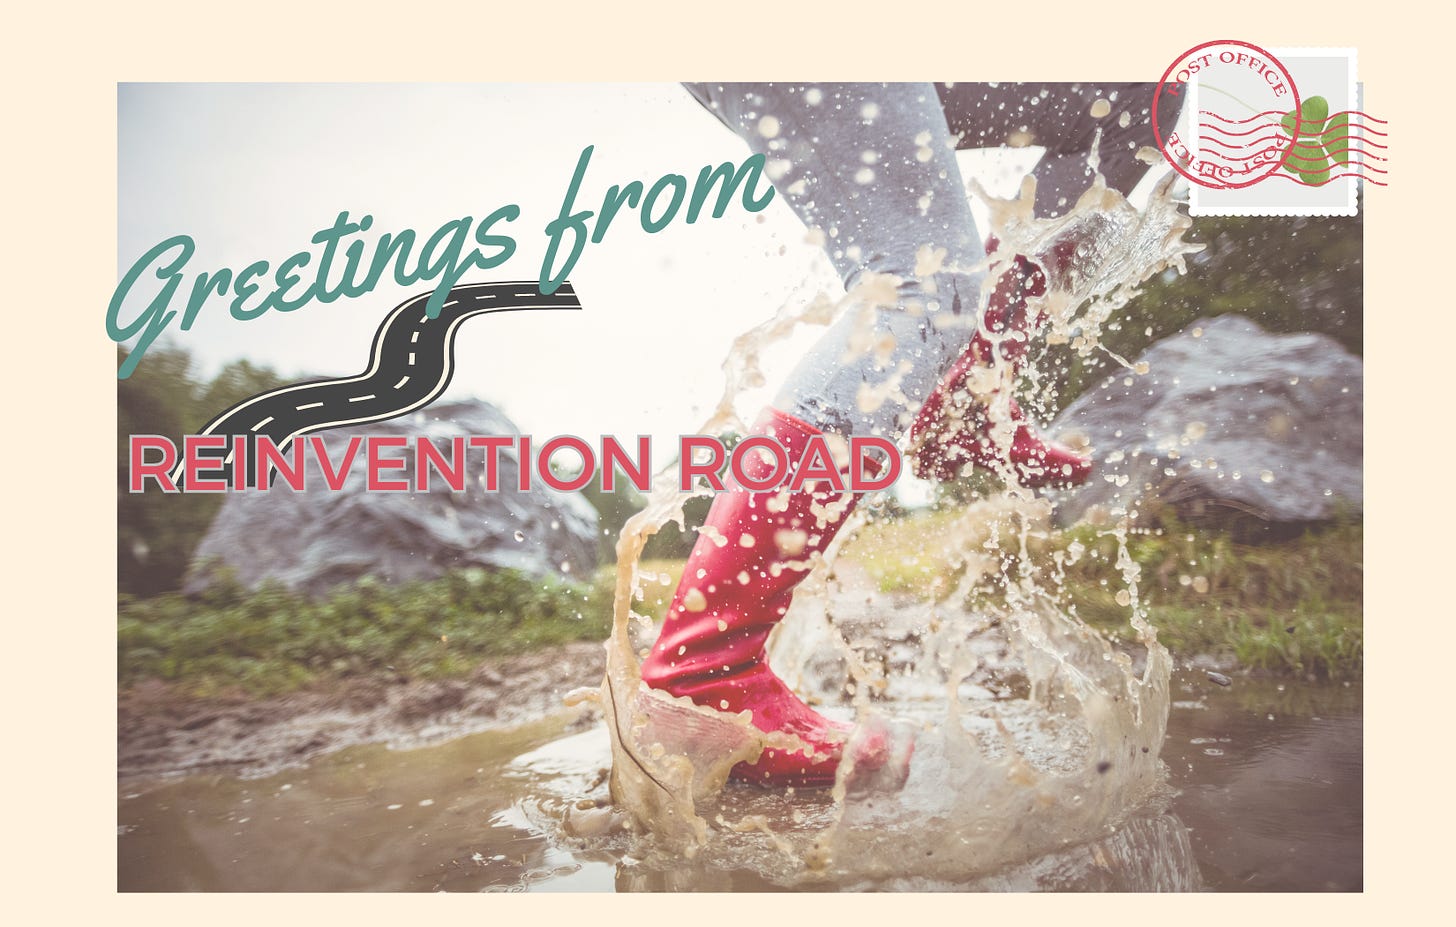 Reinvention Road Postcard Woman in Red Boots splashes on muddy road puddle